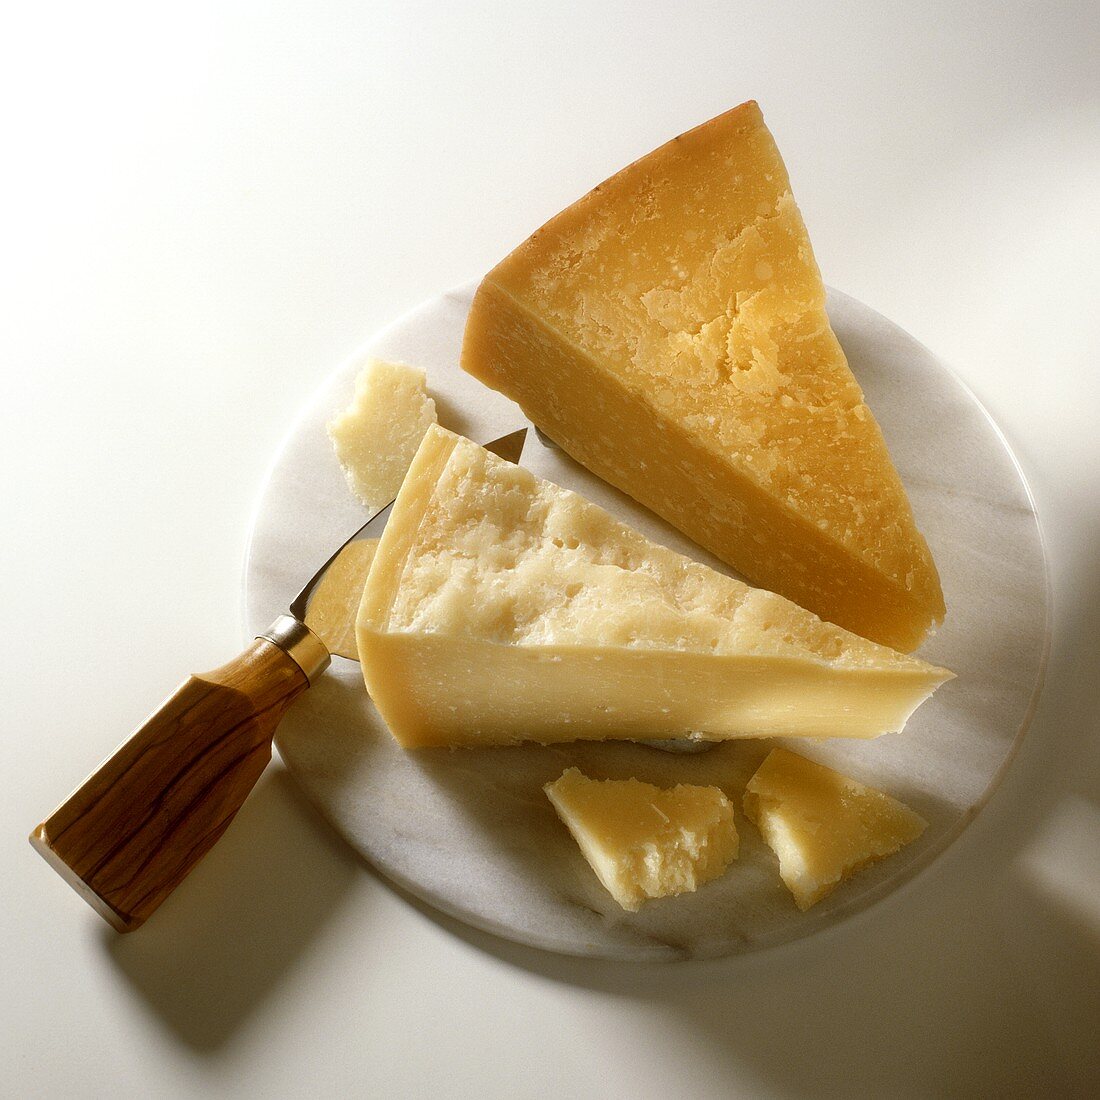 Pieces of parmesan with cheese knife on round marble slab